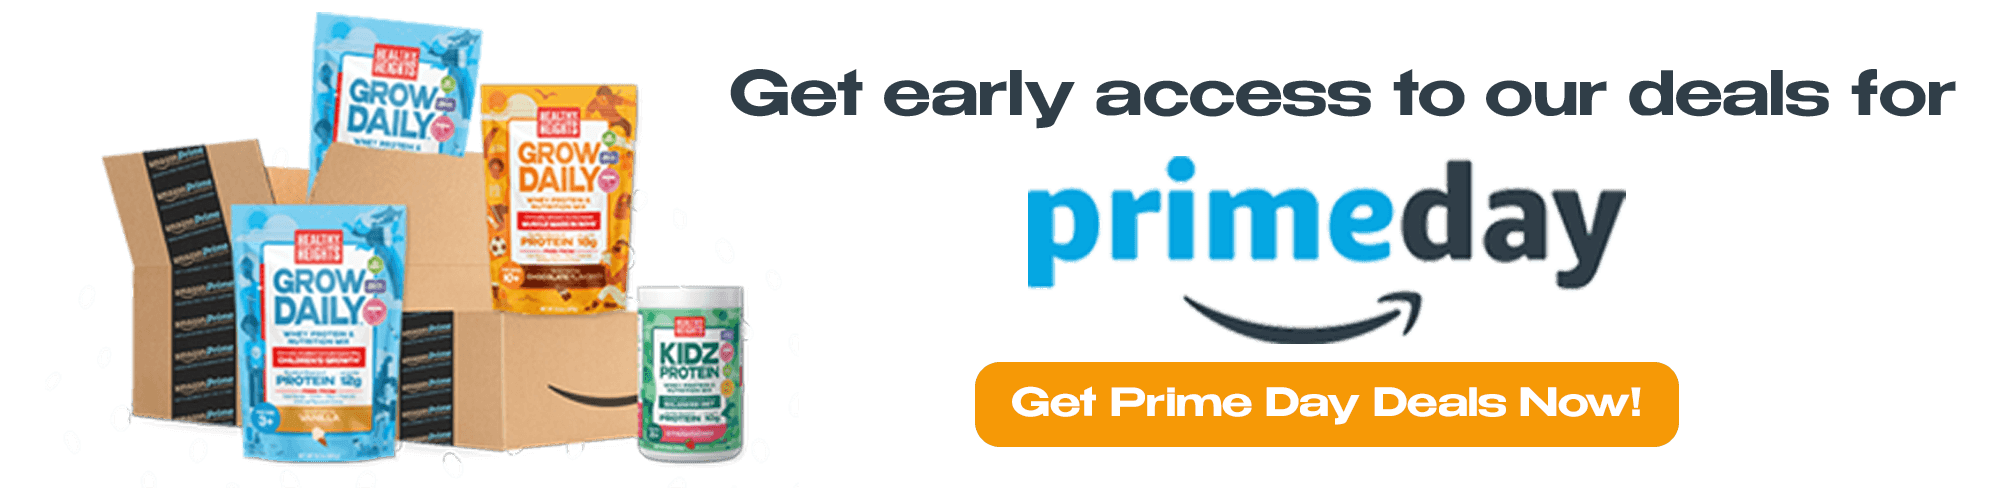 Get Prime Day Deals Now